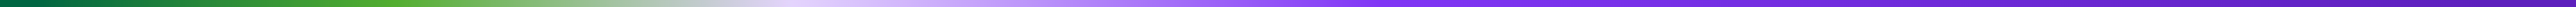 a green and purple gradient background with a purple border